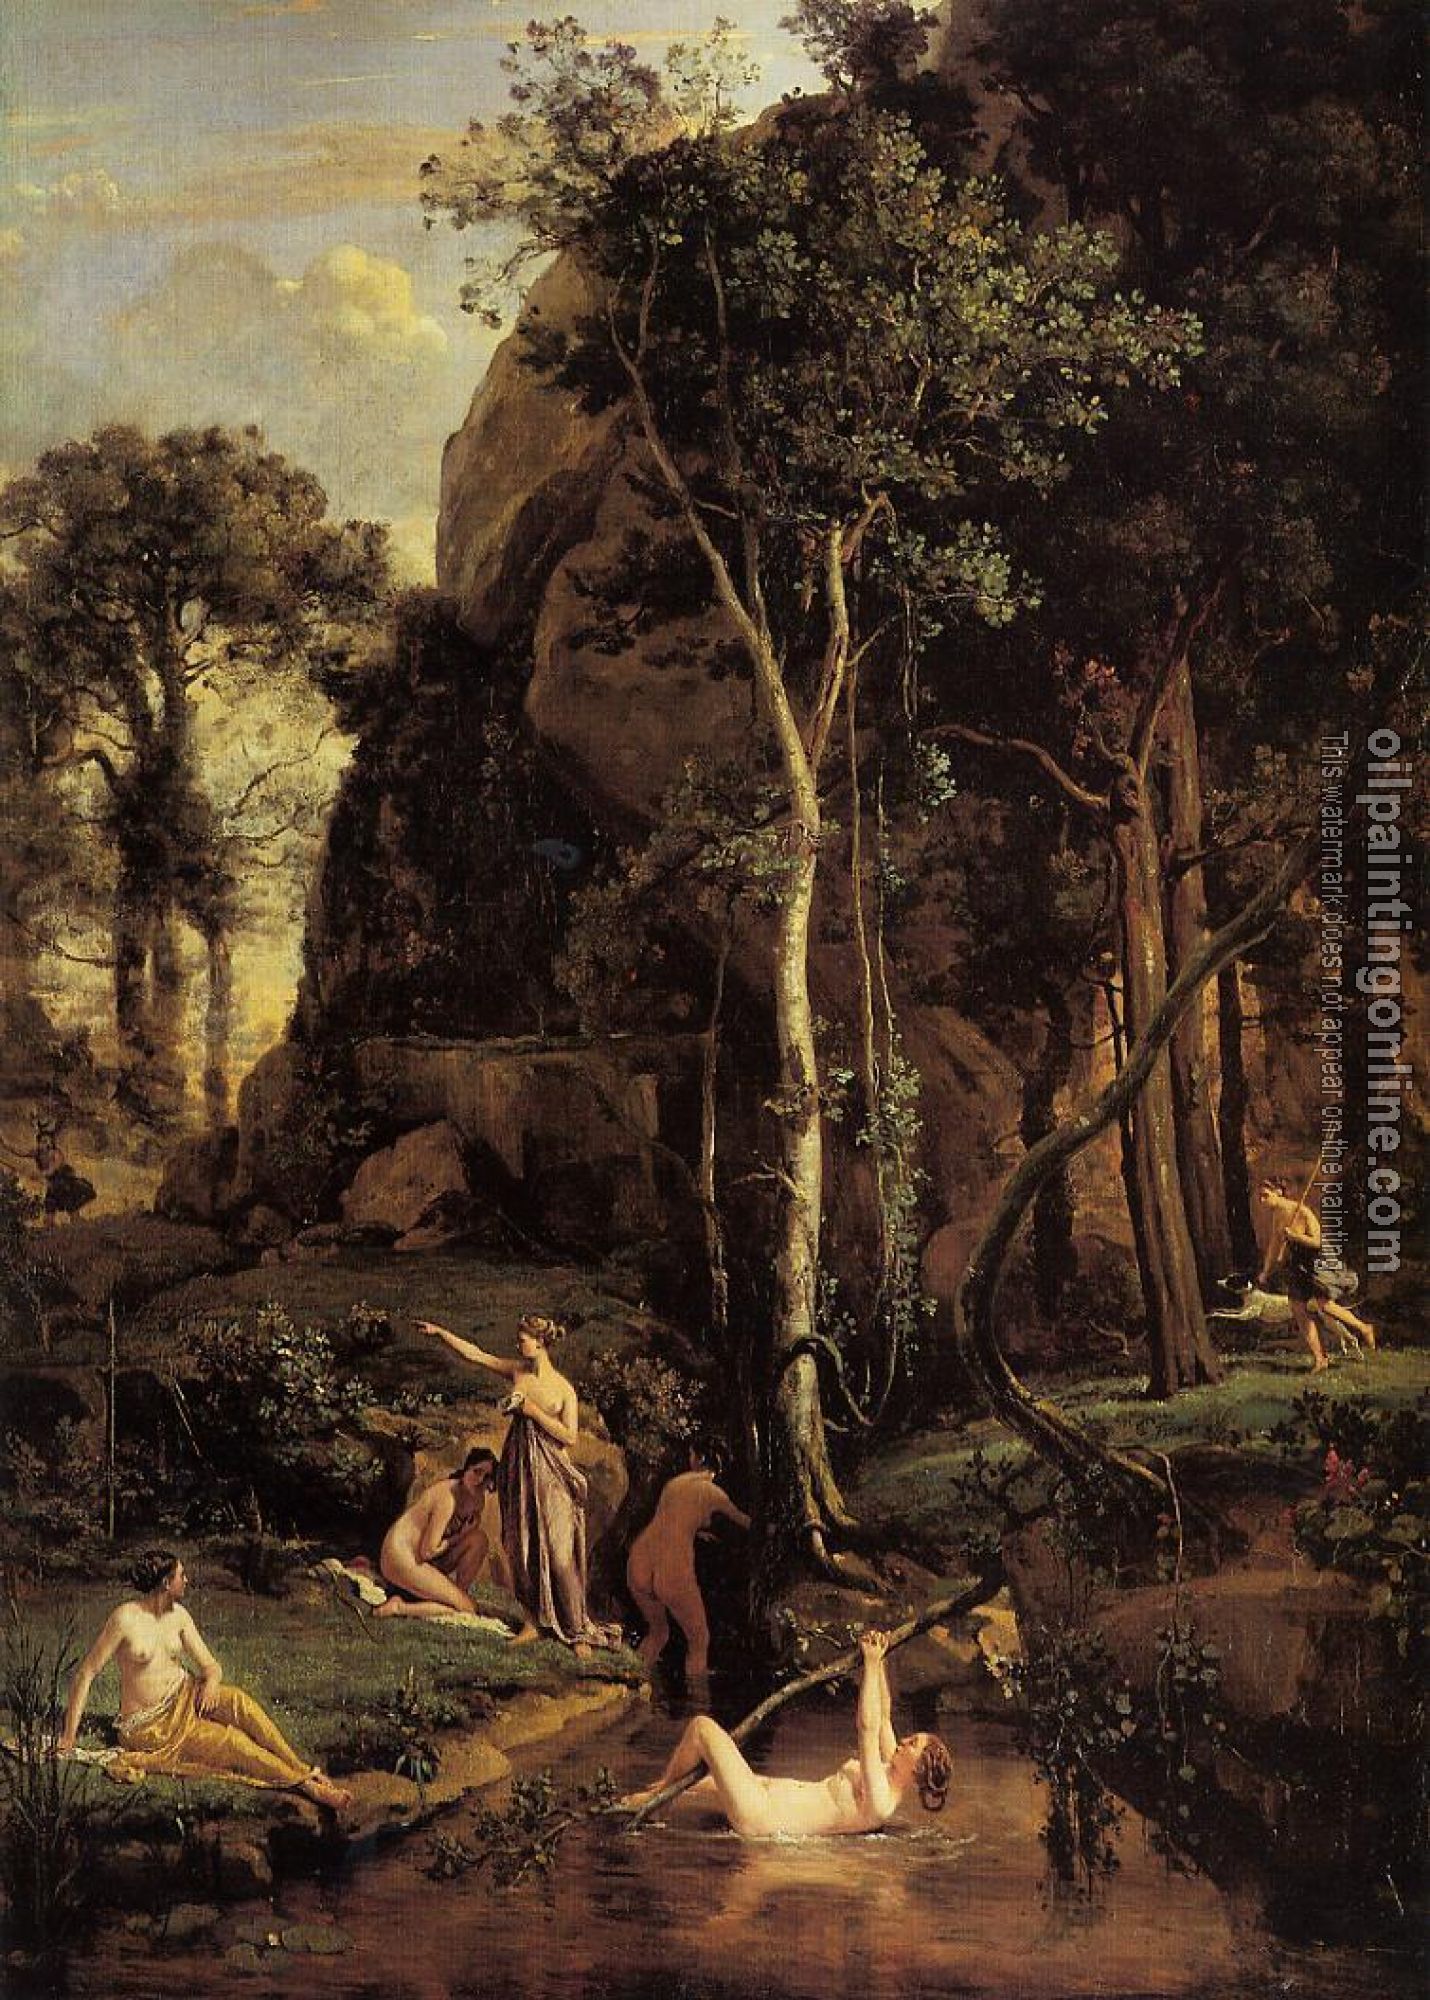 Corot, Jean-Baptiste-Camille - Diana Surprised at Her Bath